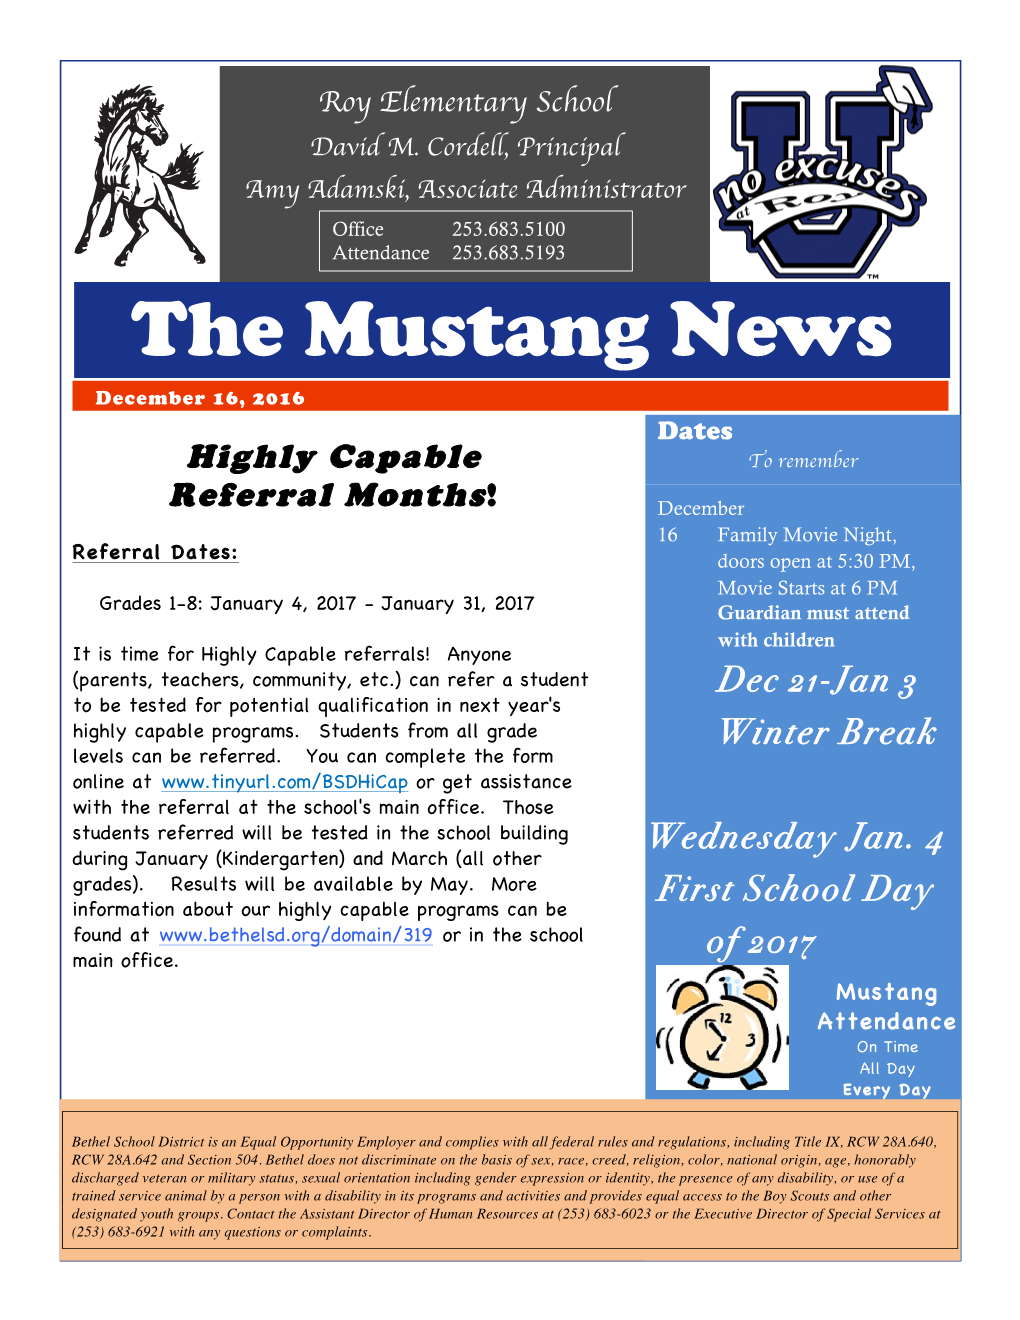 The Mustang News December 16, 2016 Dates Highly Capable to Remember